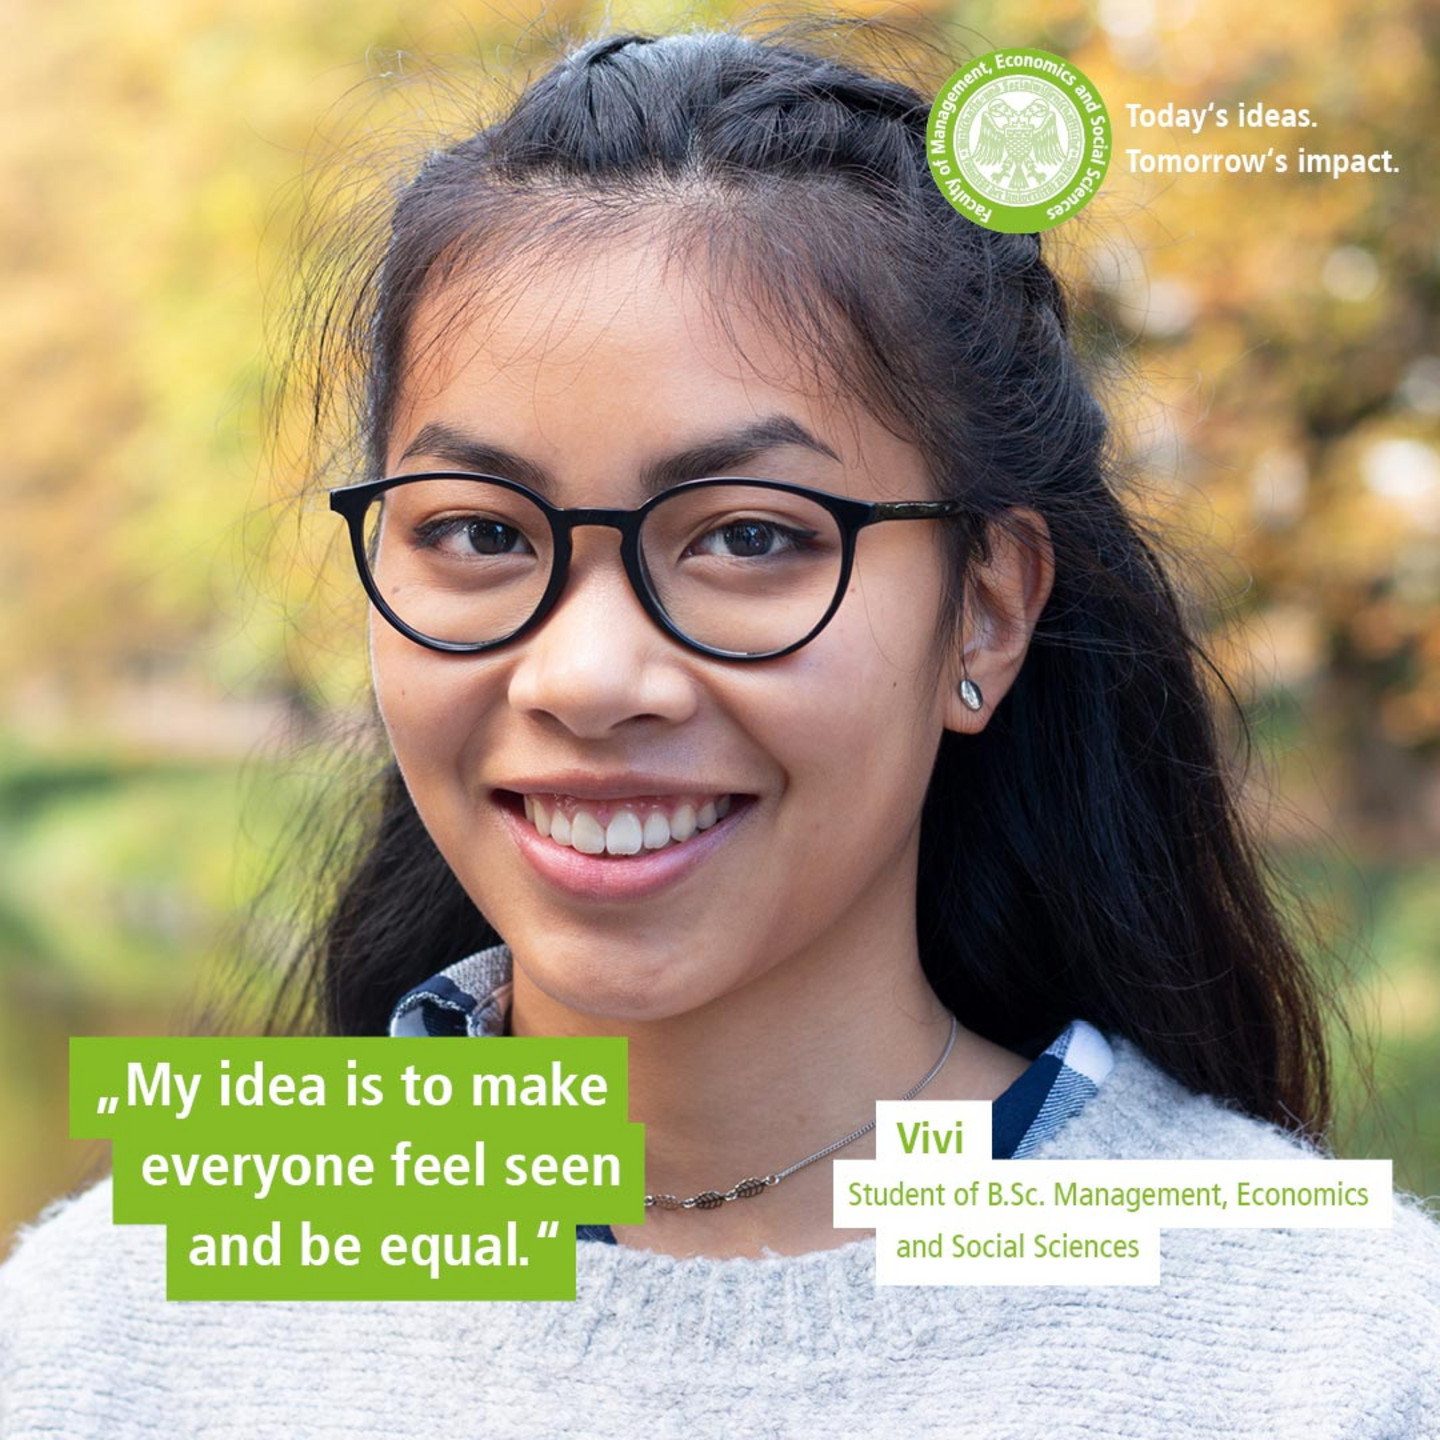 WiSo-Studentin Vivi vor herbstlichen Bäumen. Text: „Today’s Ideas. Tomorrow’s Impact. - My idea is to be inspiring, joy-bringing, and helpful to society and my surroundings.“